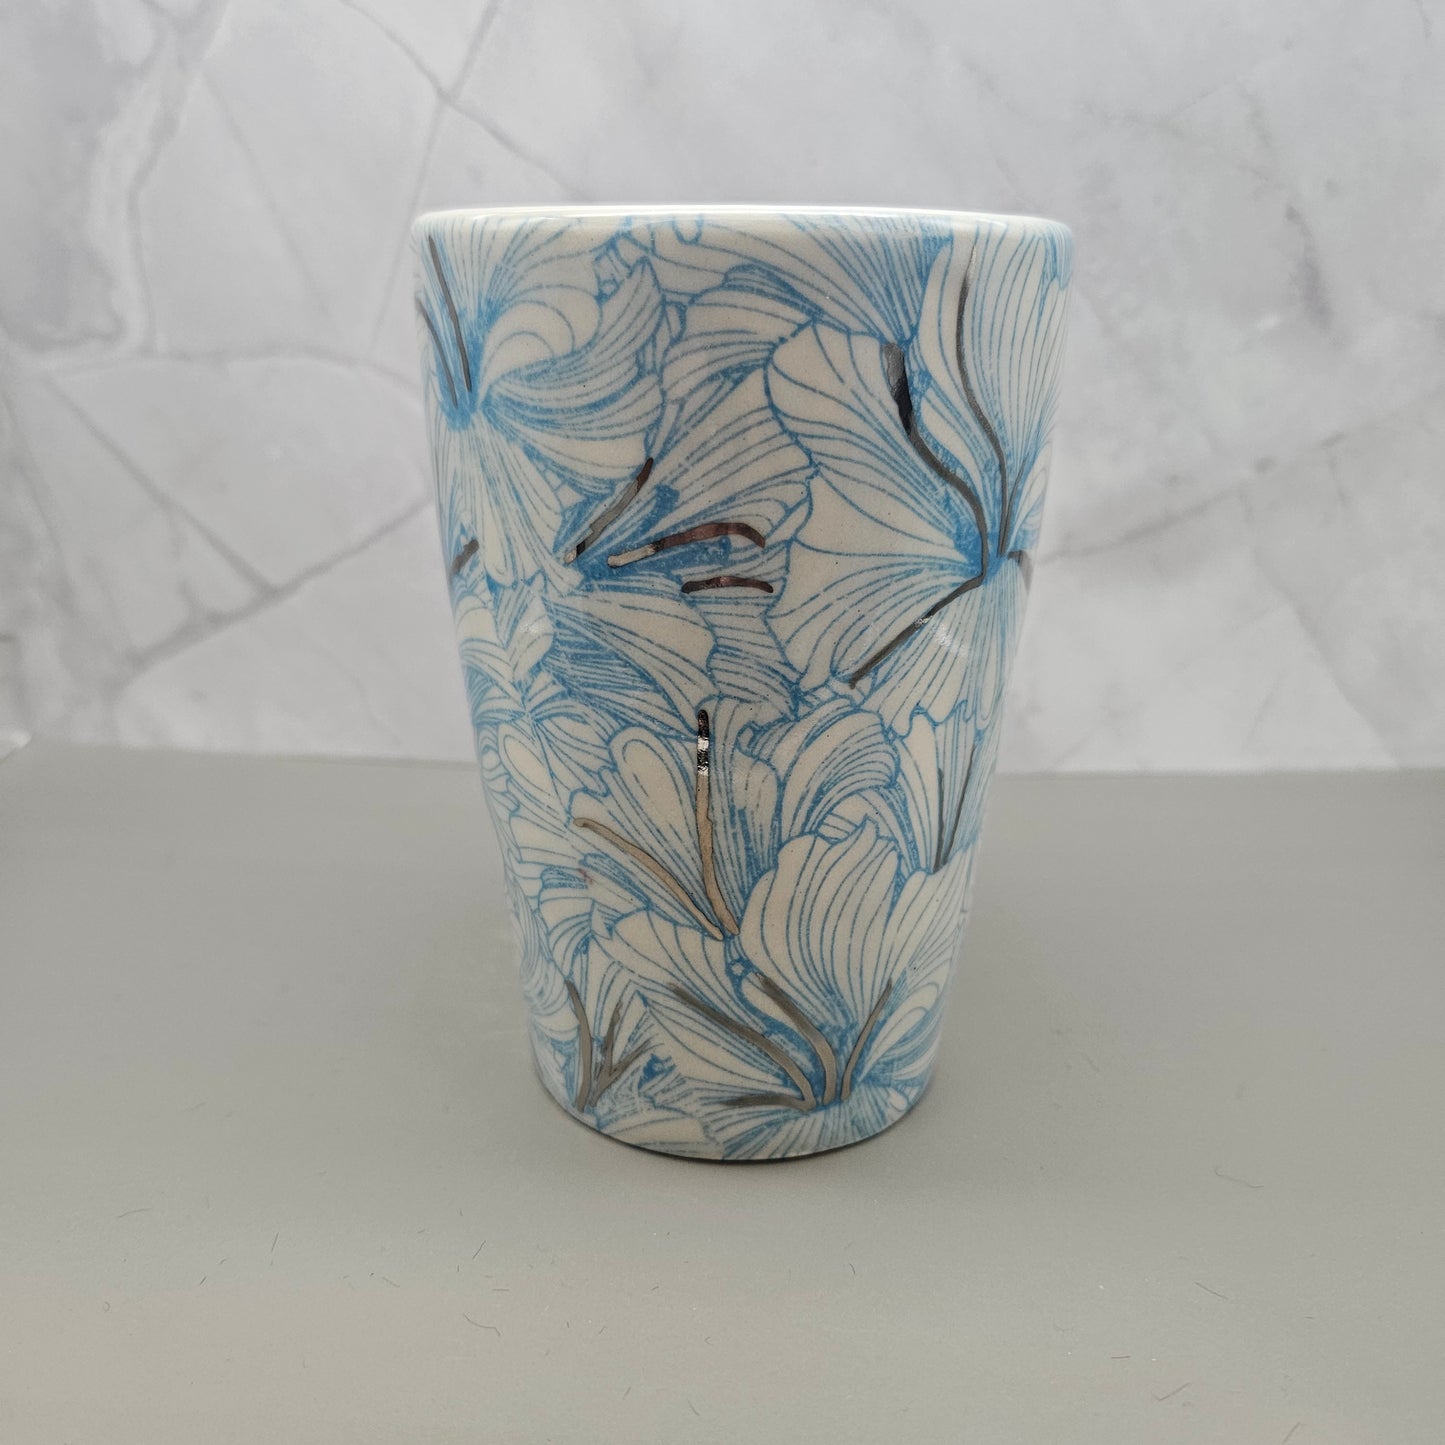 Light blue hibiscus print mug with 22k white gold handle and accents, 14 oz